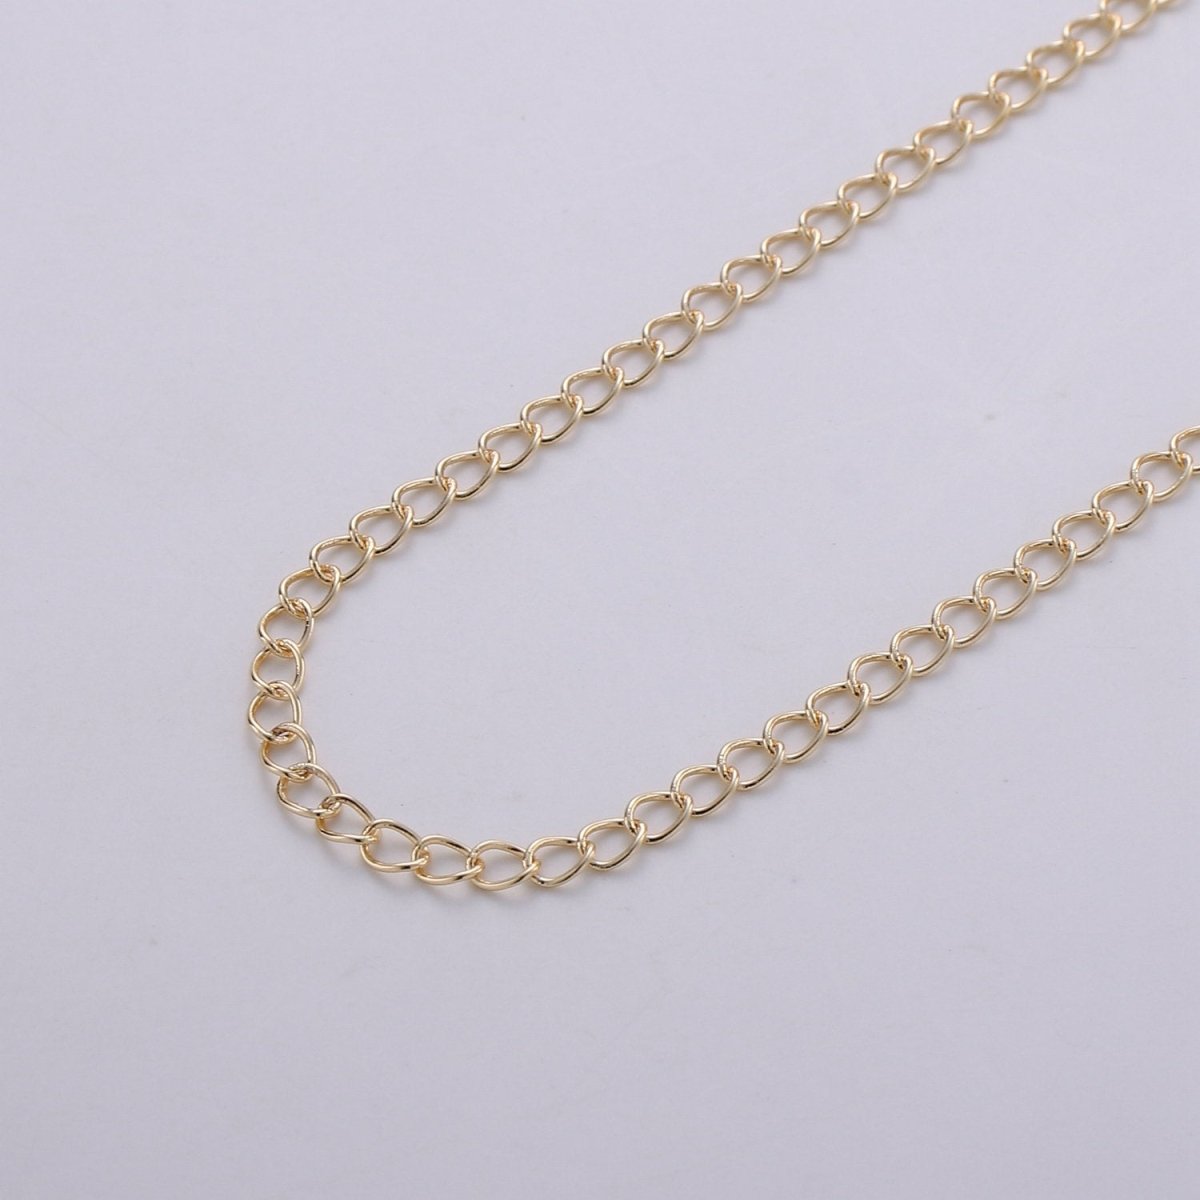 16K Gold Filled 3mm Chain by yard, Unfinished Double Link Chain for Necklace Bracelet Anklet Perfect for Chain Extender component | ROLL-288 - DLUXCA